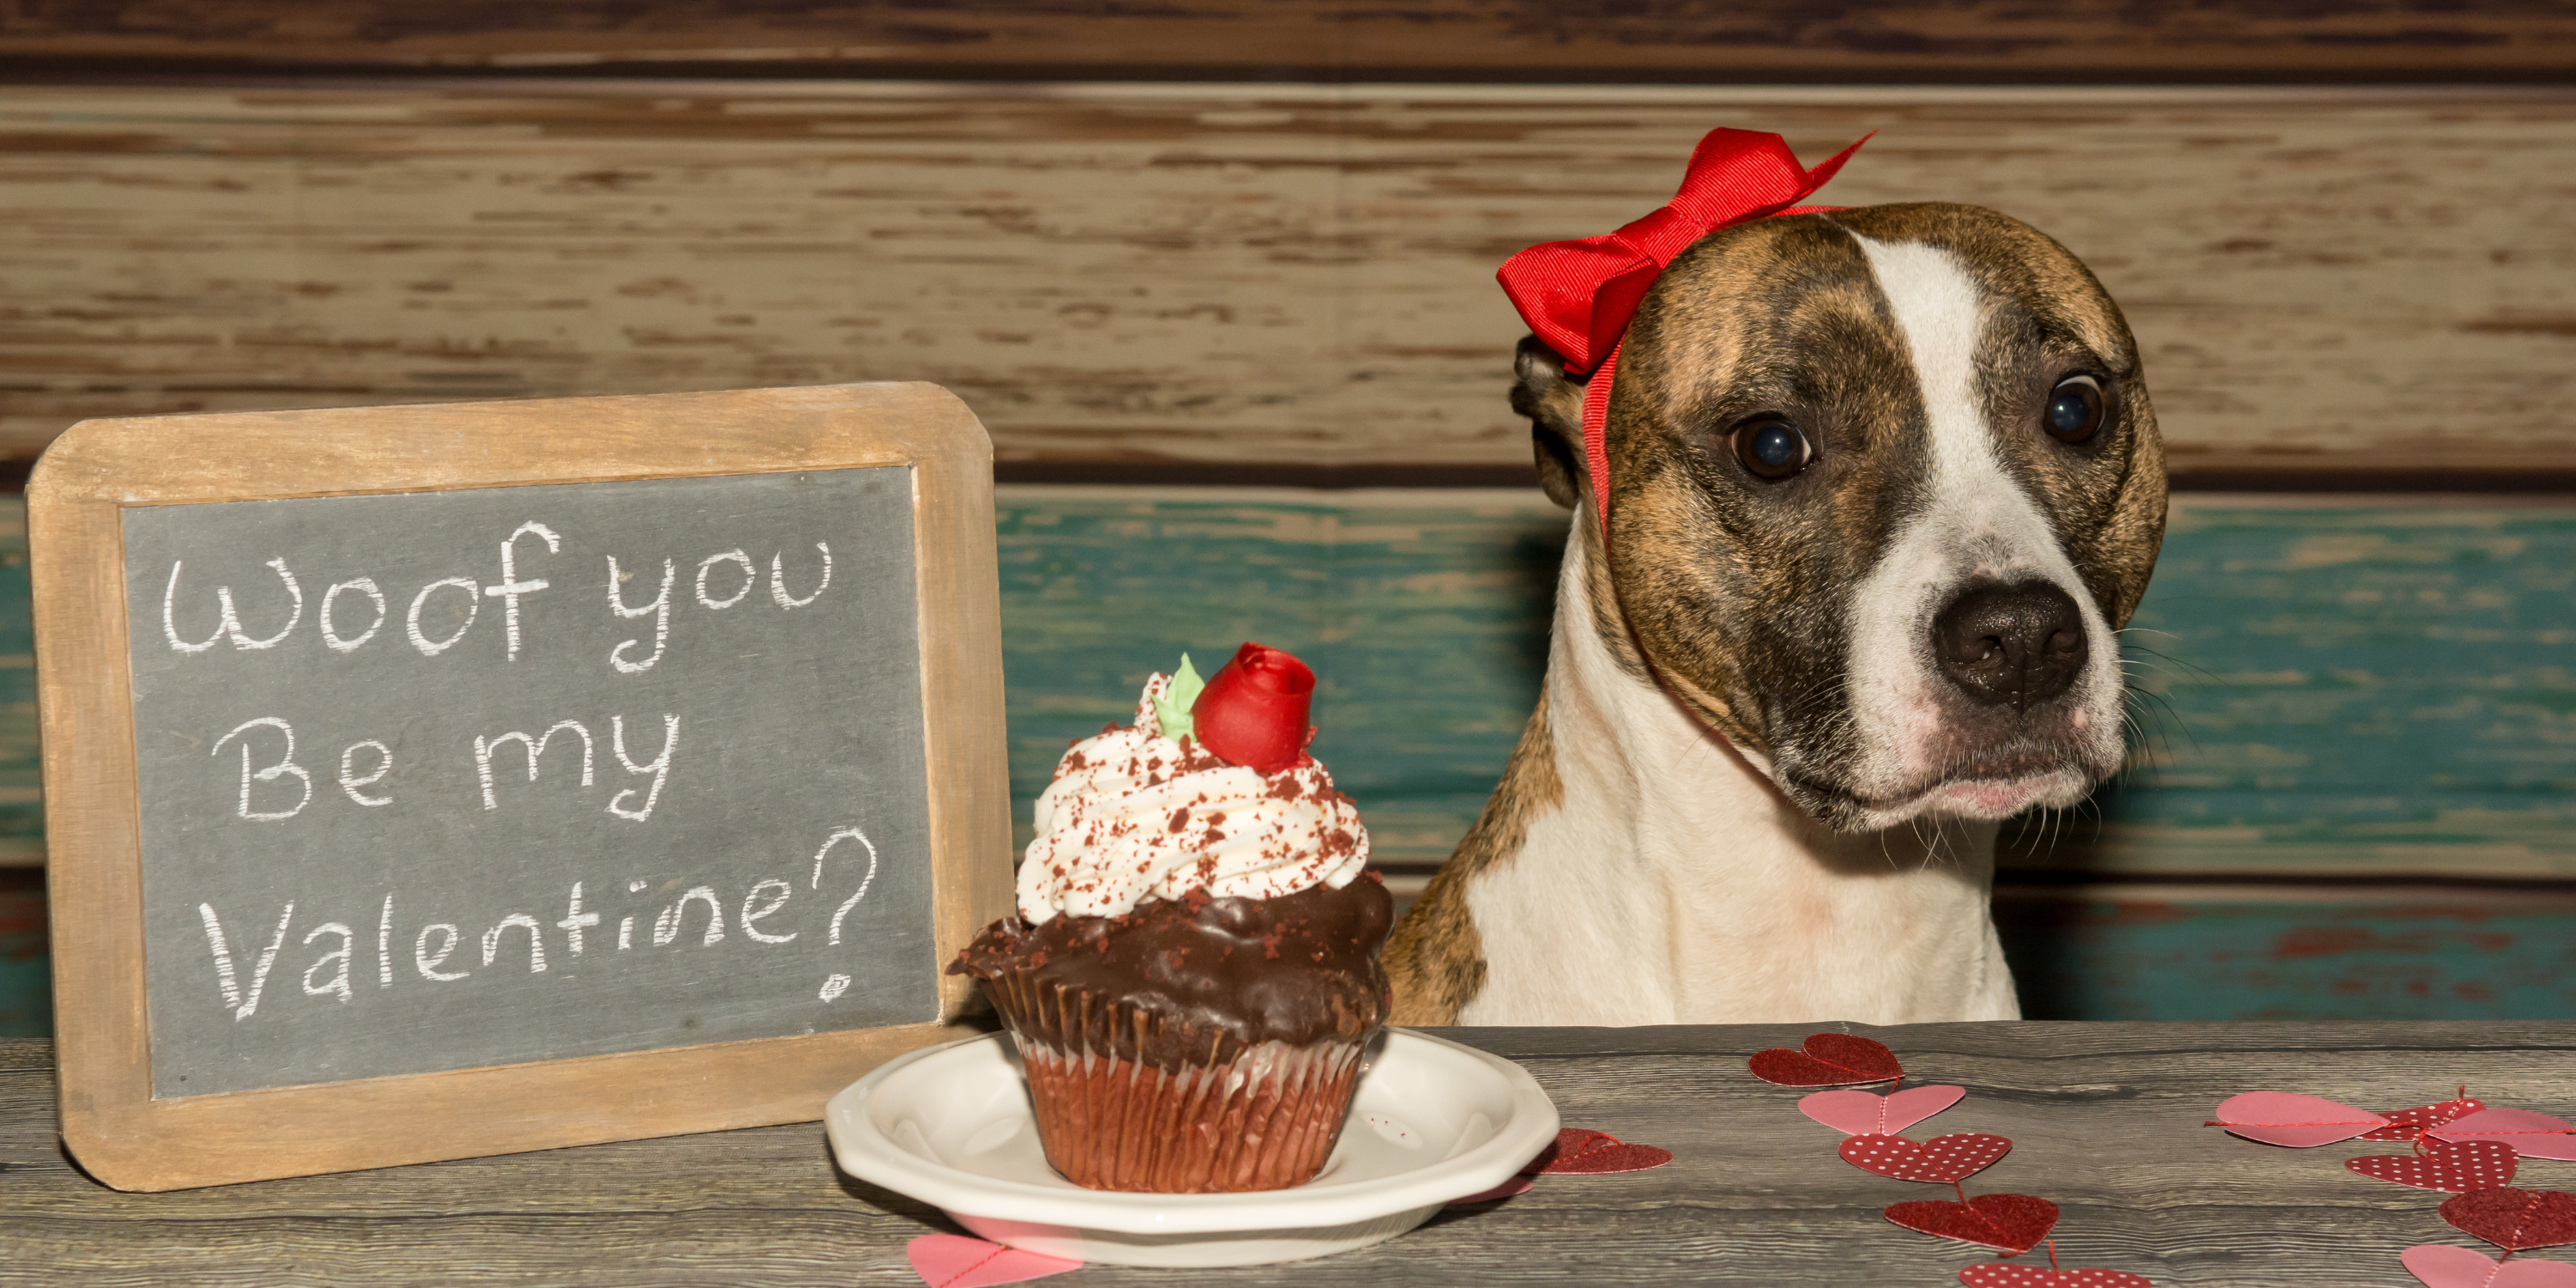 10 ways to show your dog you love them on Valentine’s Day!